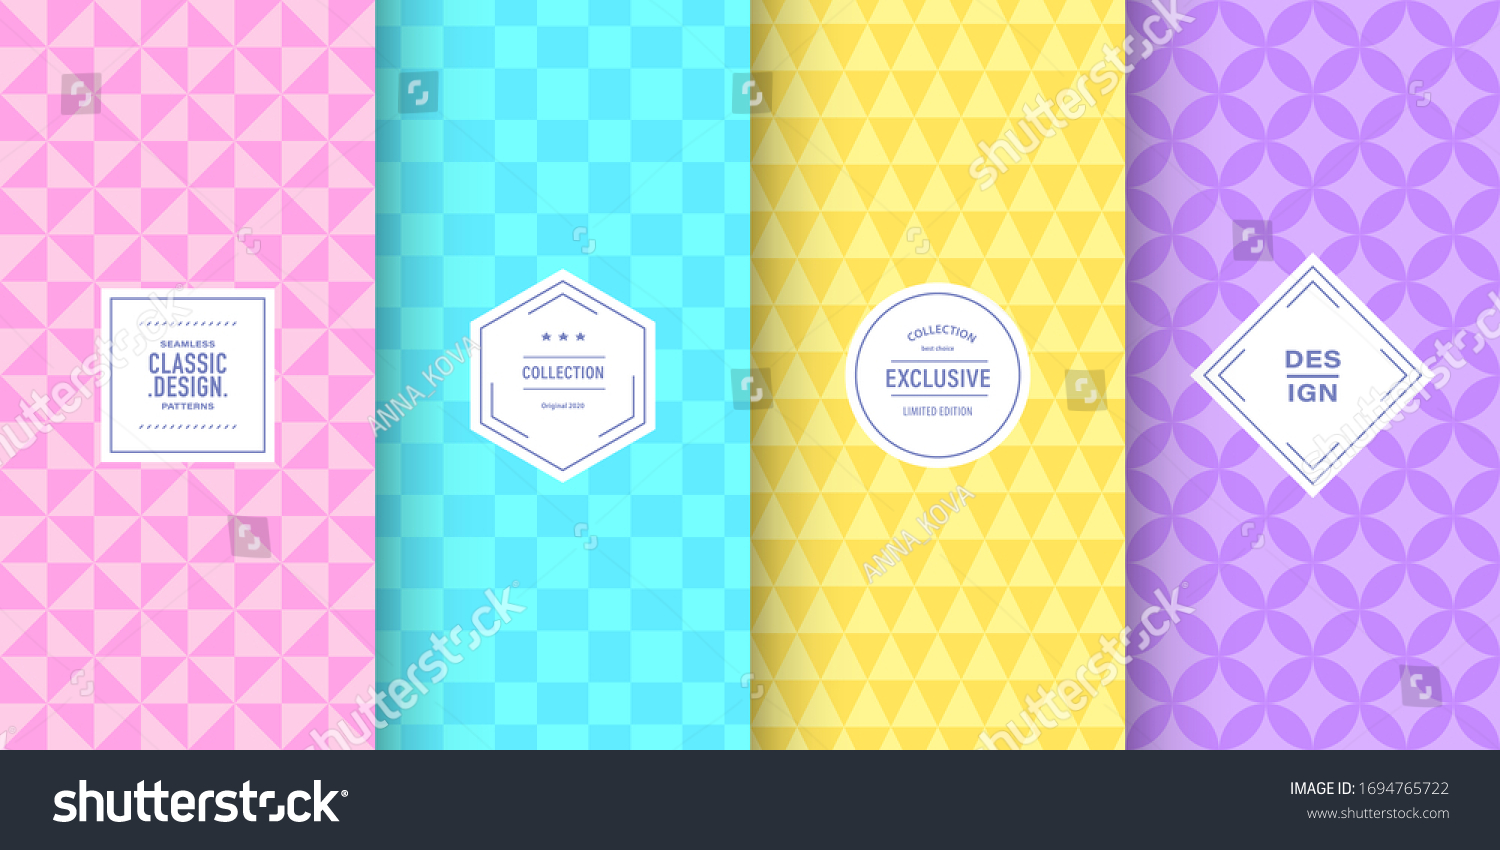 Retro Pastel Triangle Patterns Set Vector Stock Vector (Royalty Free ...